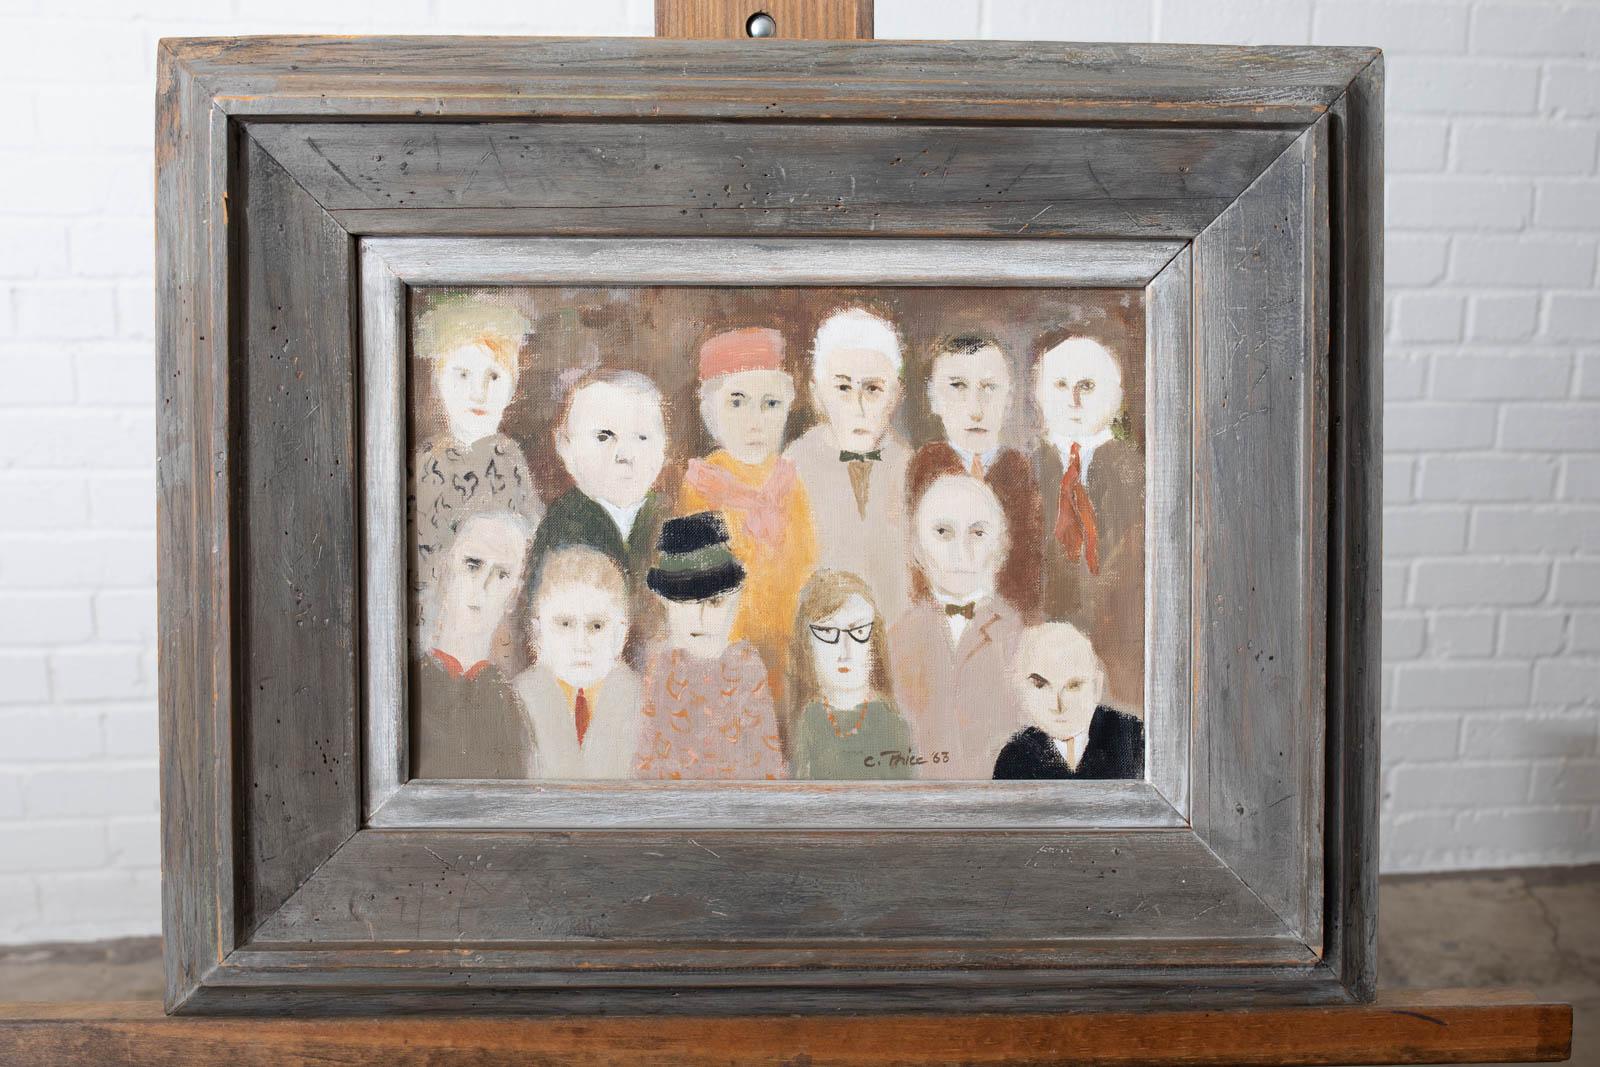 Mesmerizing oil on canvas expressionist painting depicting twelve figures or portraits. Signed and dated C. Price 1963. Art measures 12 inches wide by 8 inches high. Set in a distressed, painted wood frame. From an estate in Hollywood, CA.